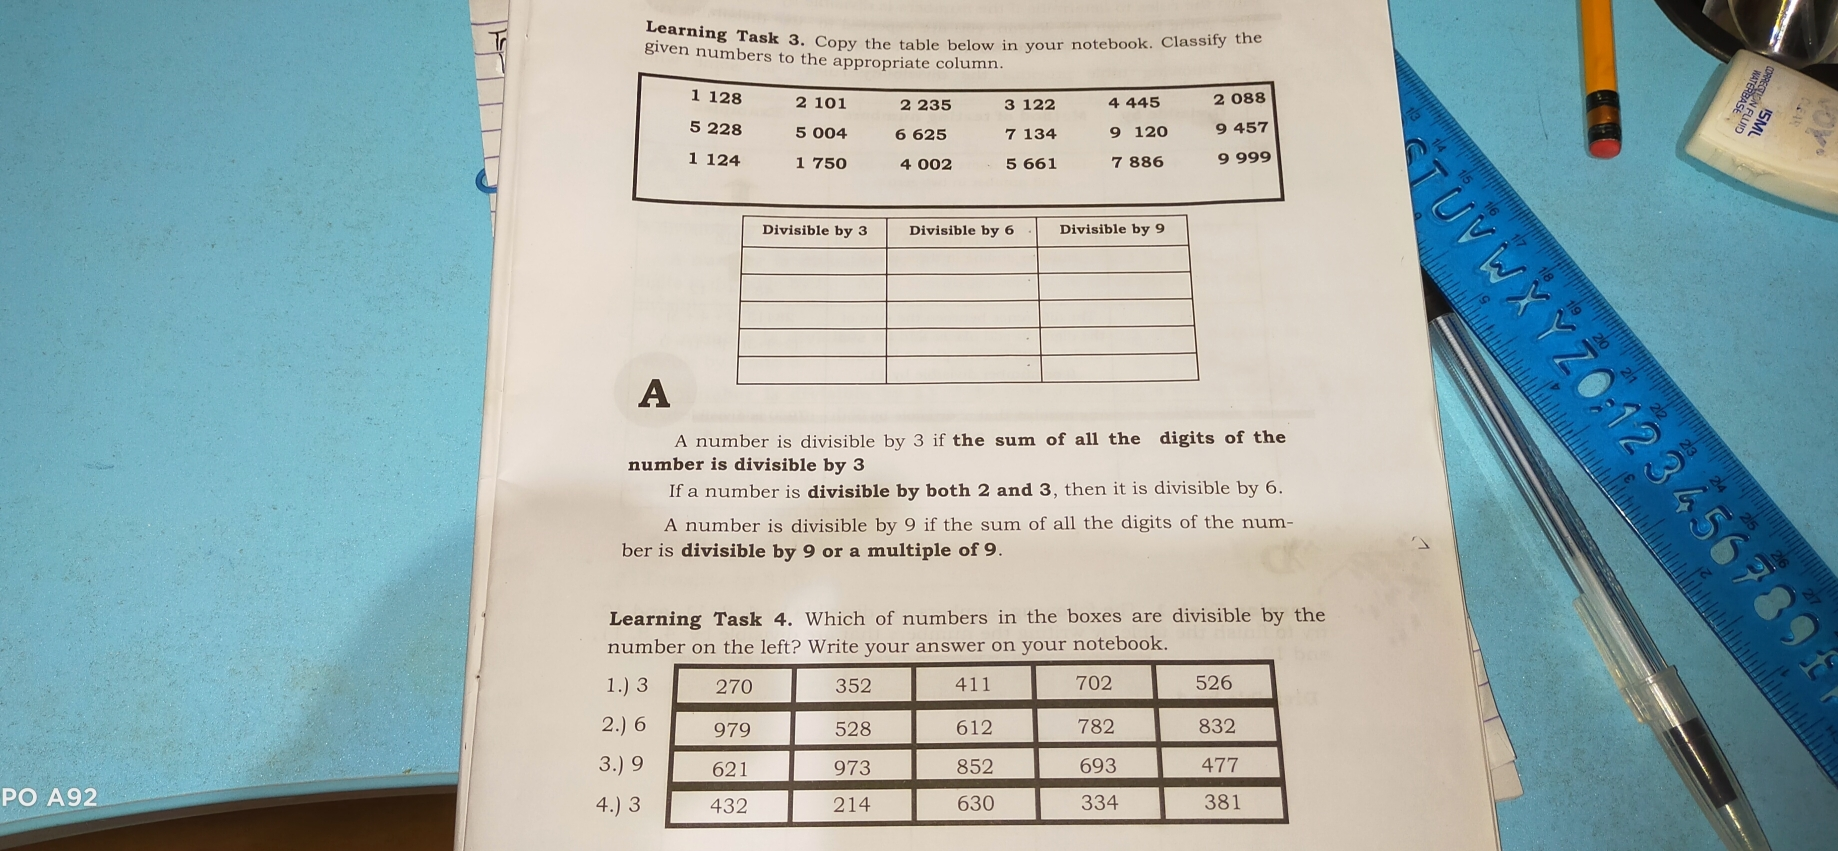 Learning Task 3. Copy the table below in your notebook. Classify the given numbers A A number is divisible by 3 if the sum of all the digits of the number is divisible by 3 If a number is divisible by both 2 and 3, then it is divisible by 6. A number is divisible by 9 if the sum of all the digits of the num- ber is divisible by 9 or a multiple of 9.. Learning Task 4. Which of numbers in the boxes are divisible by the Write your answer on your notebook. 4